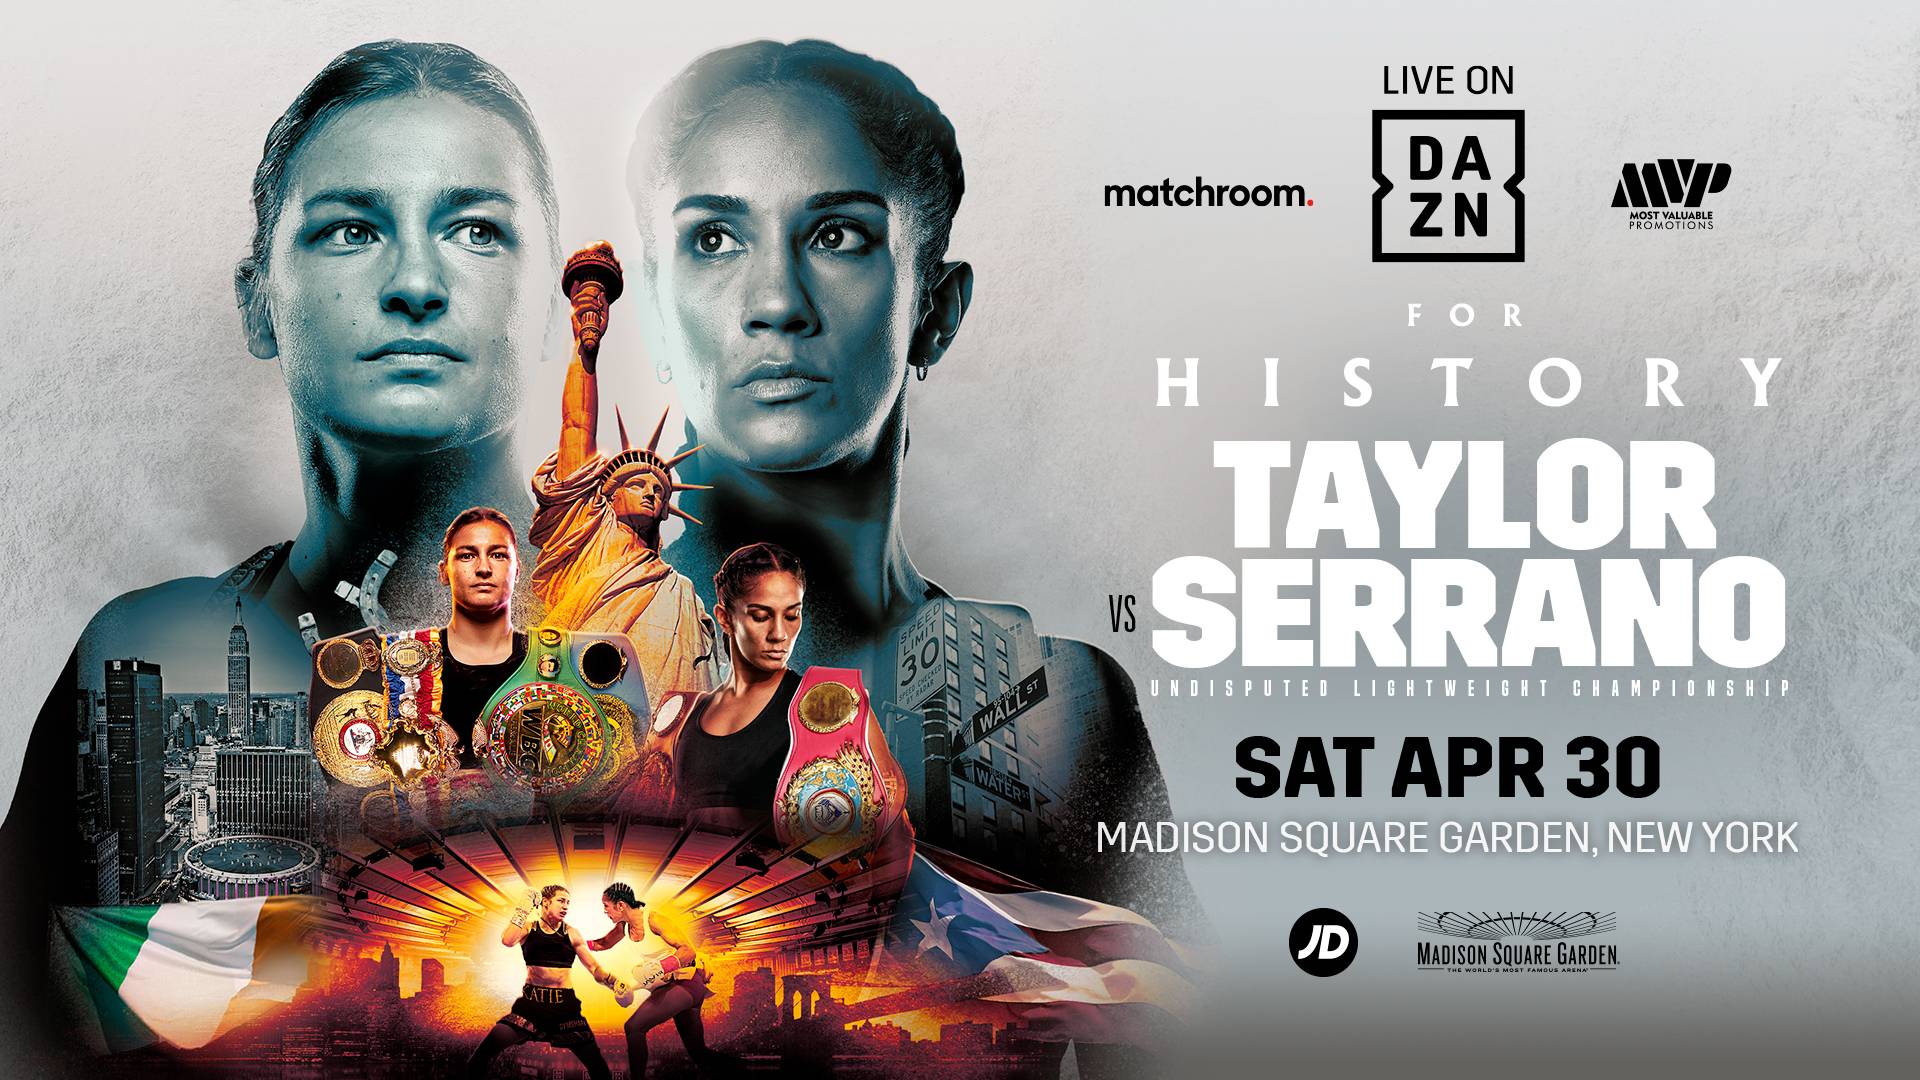 The official fight poster for Katie Taylor against Amanda Serrano.